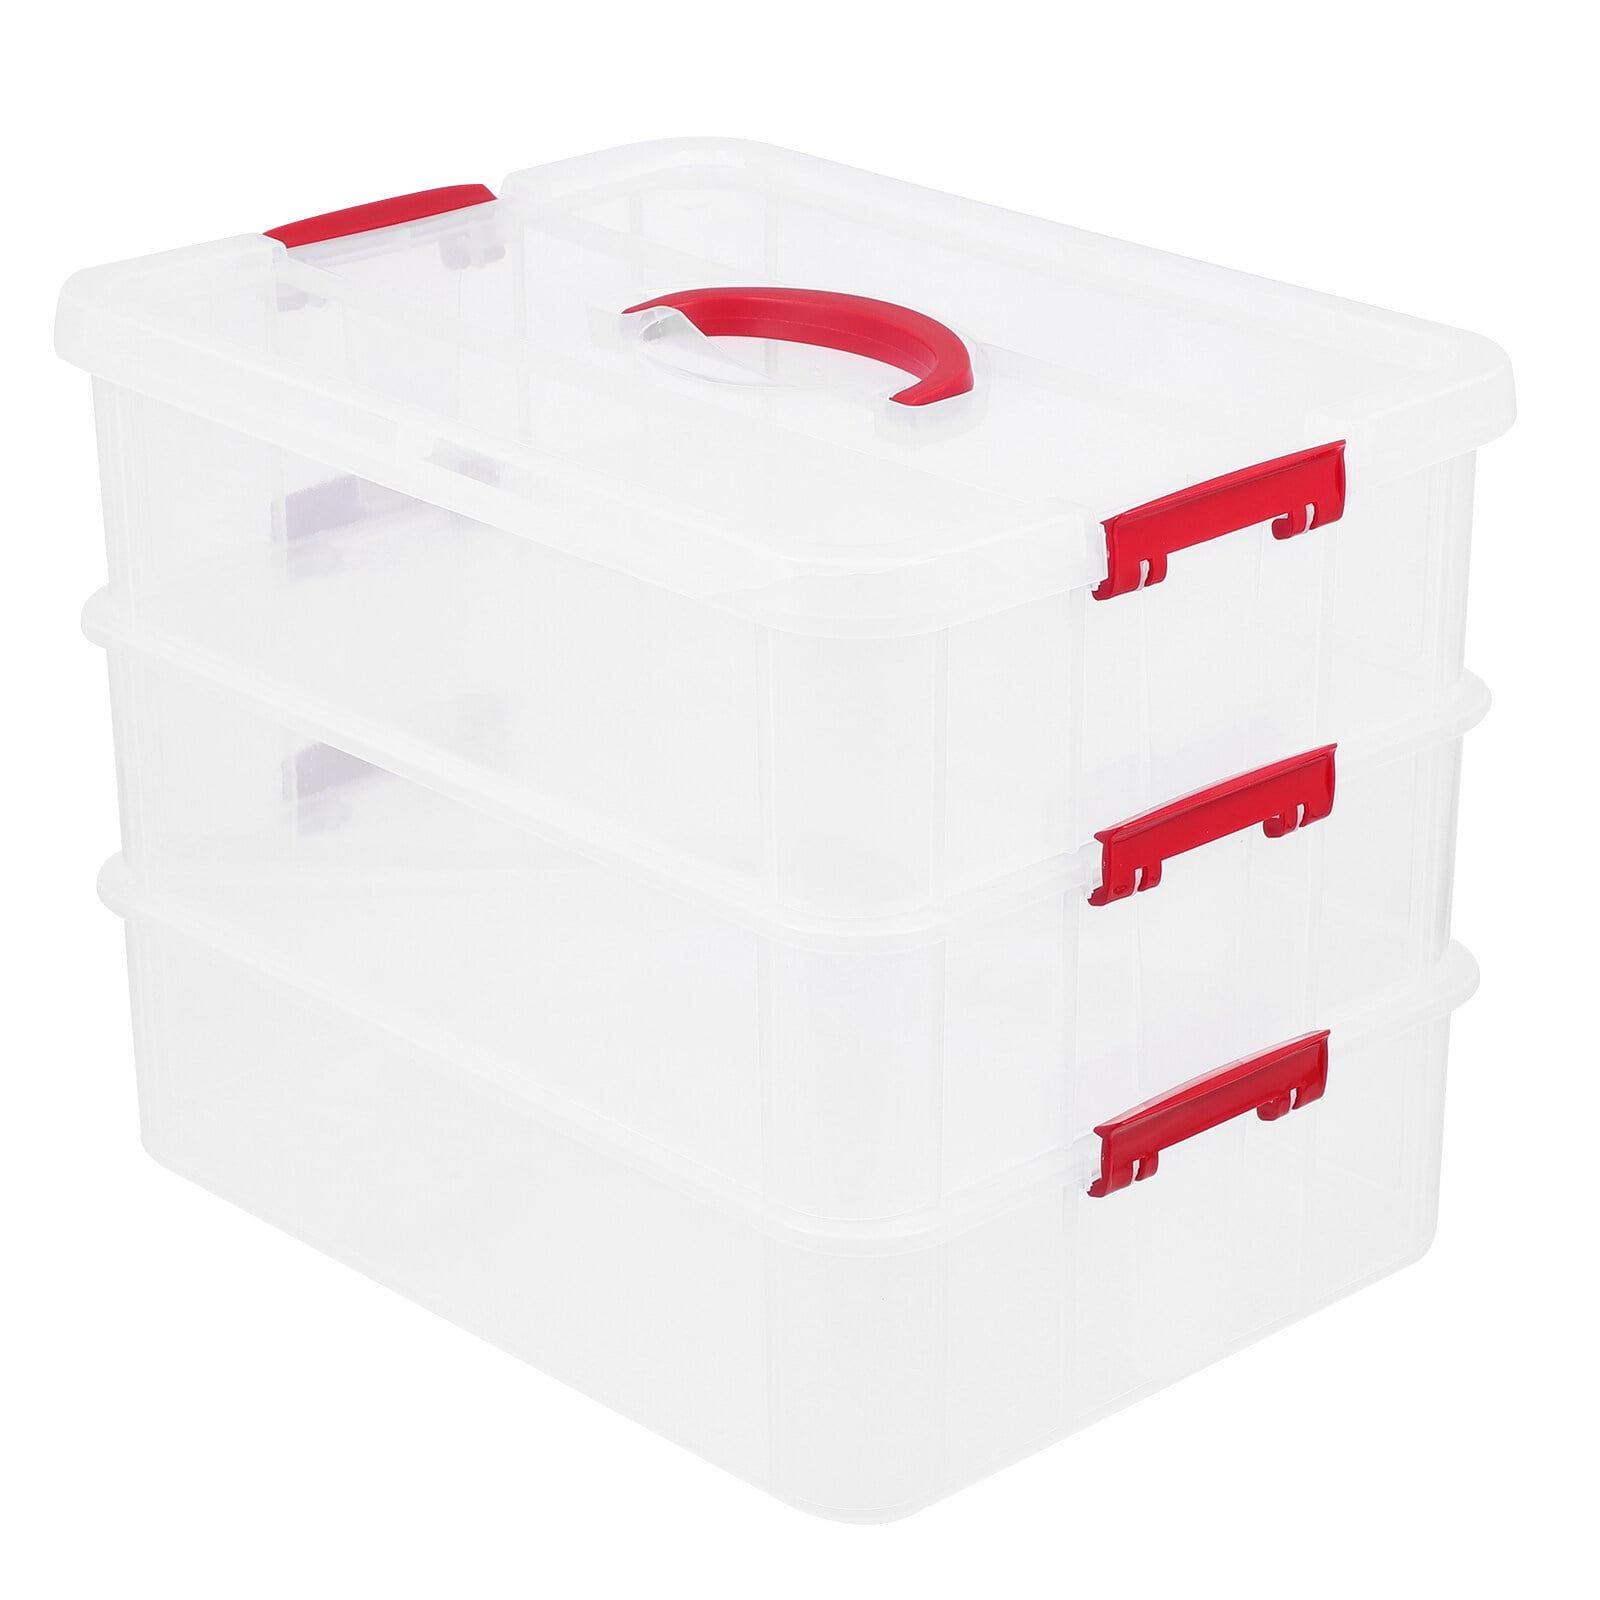 HOMEMAXS Plastic 3-tiers Stack Carry Storage Box With Handle Transparent  Storage Bin 